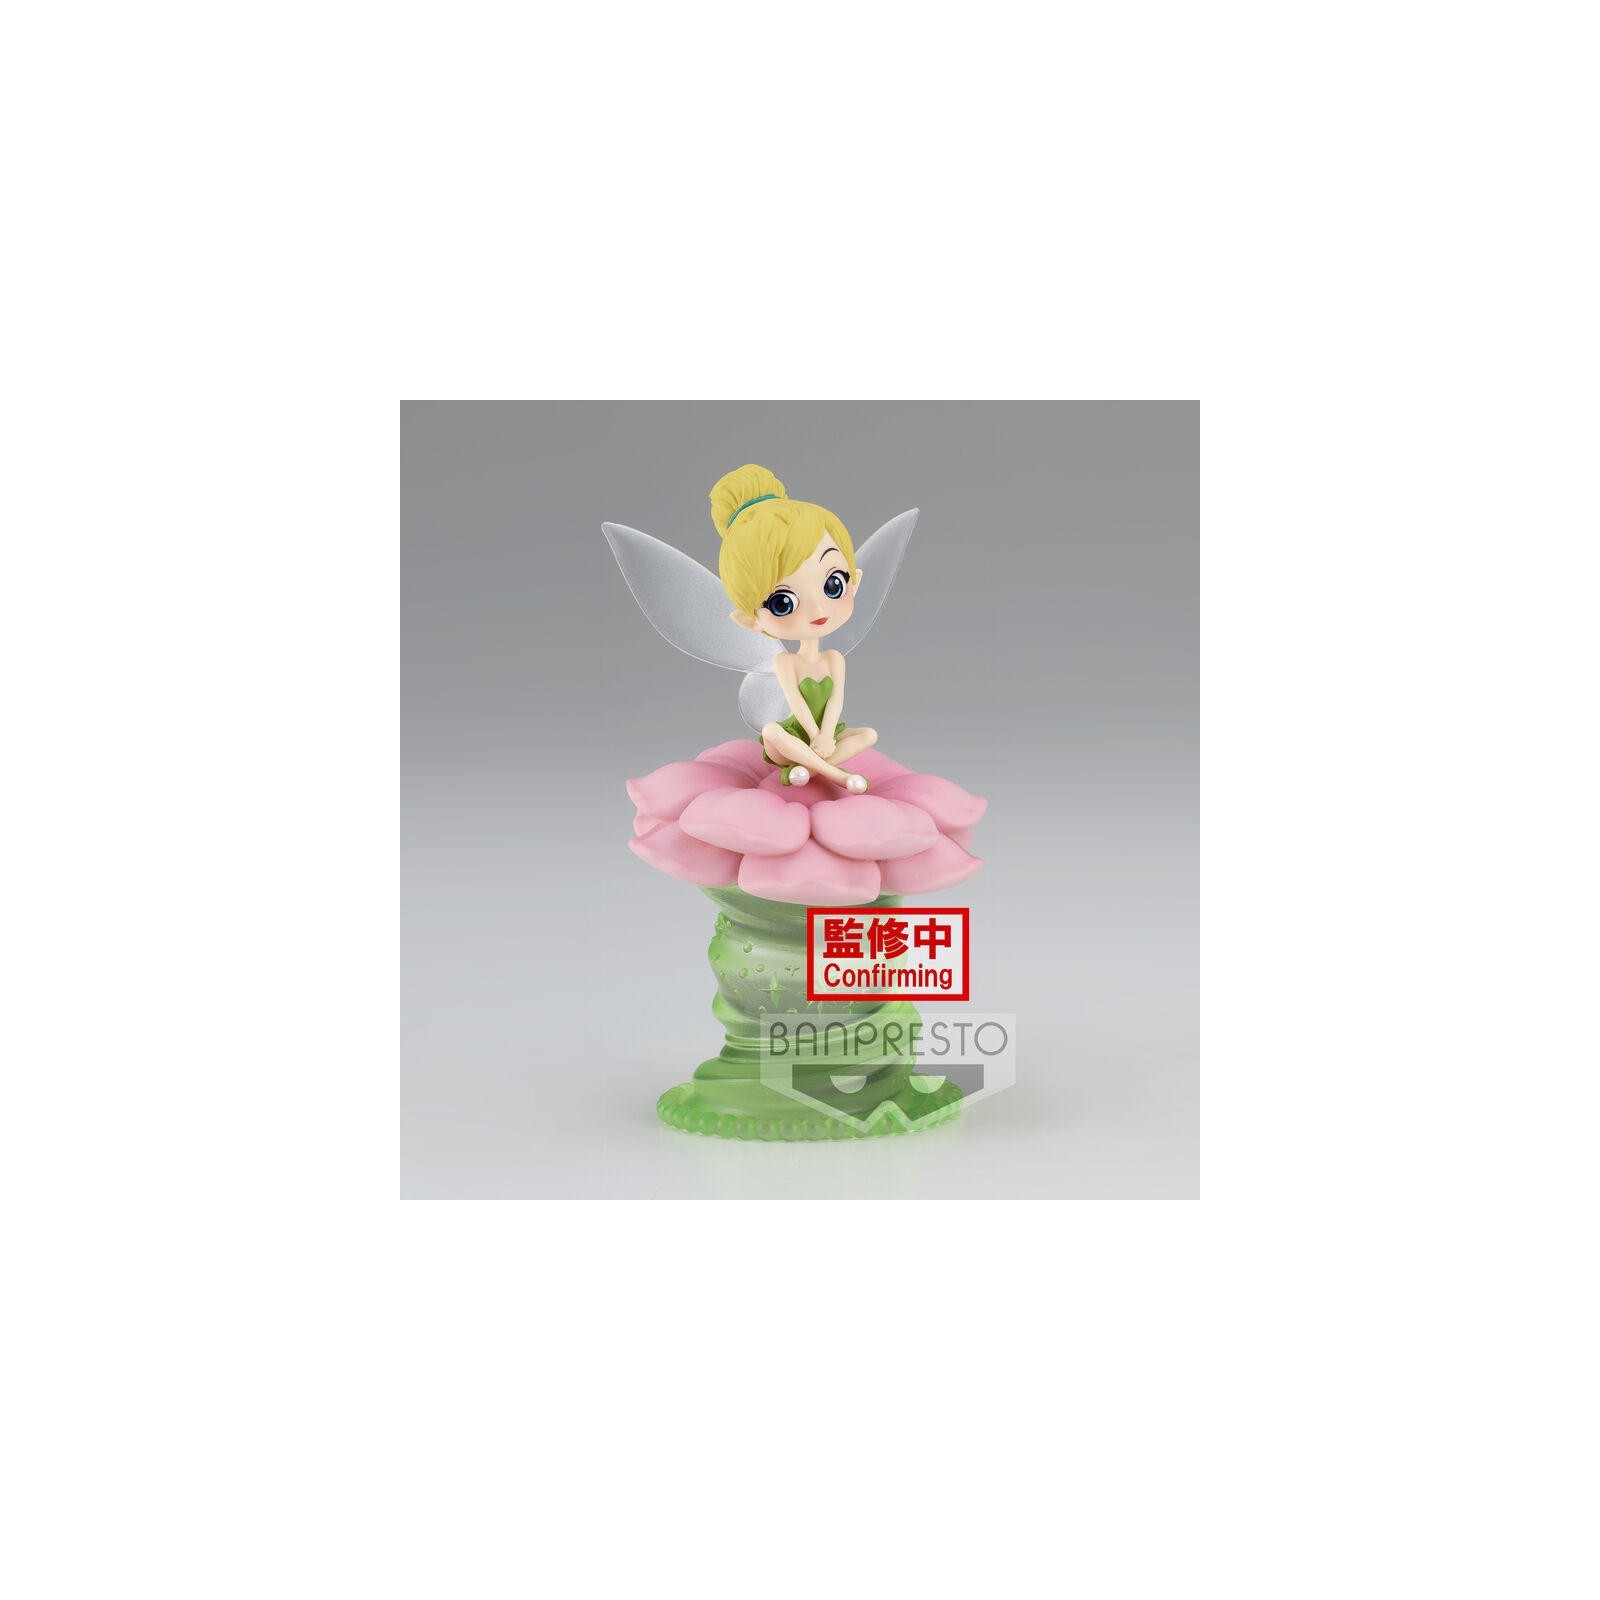 Figura Tinker Bell Ver.A Disney Characters Q Posket 10Cm